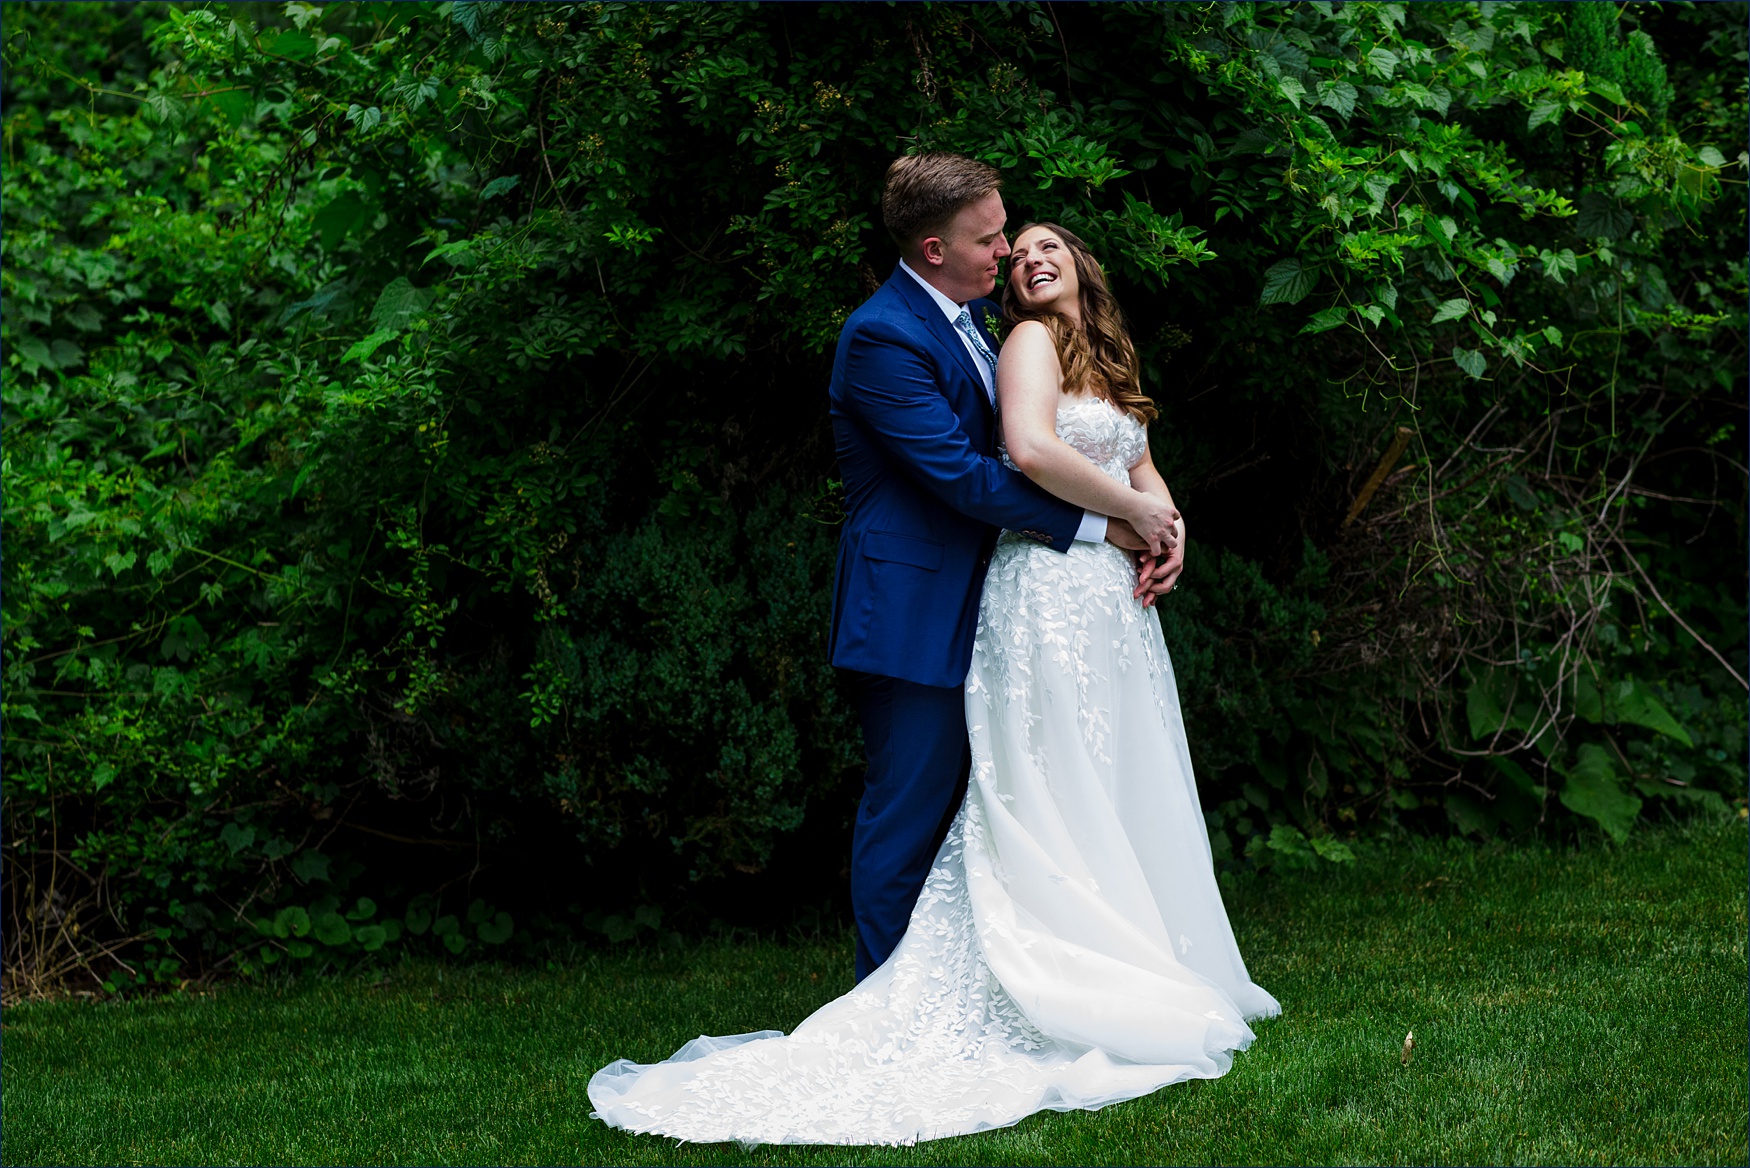 A laugh and a snuggle for the bride and groom after their backyard intimate wedding